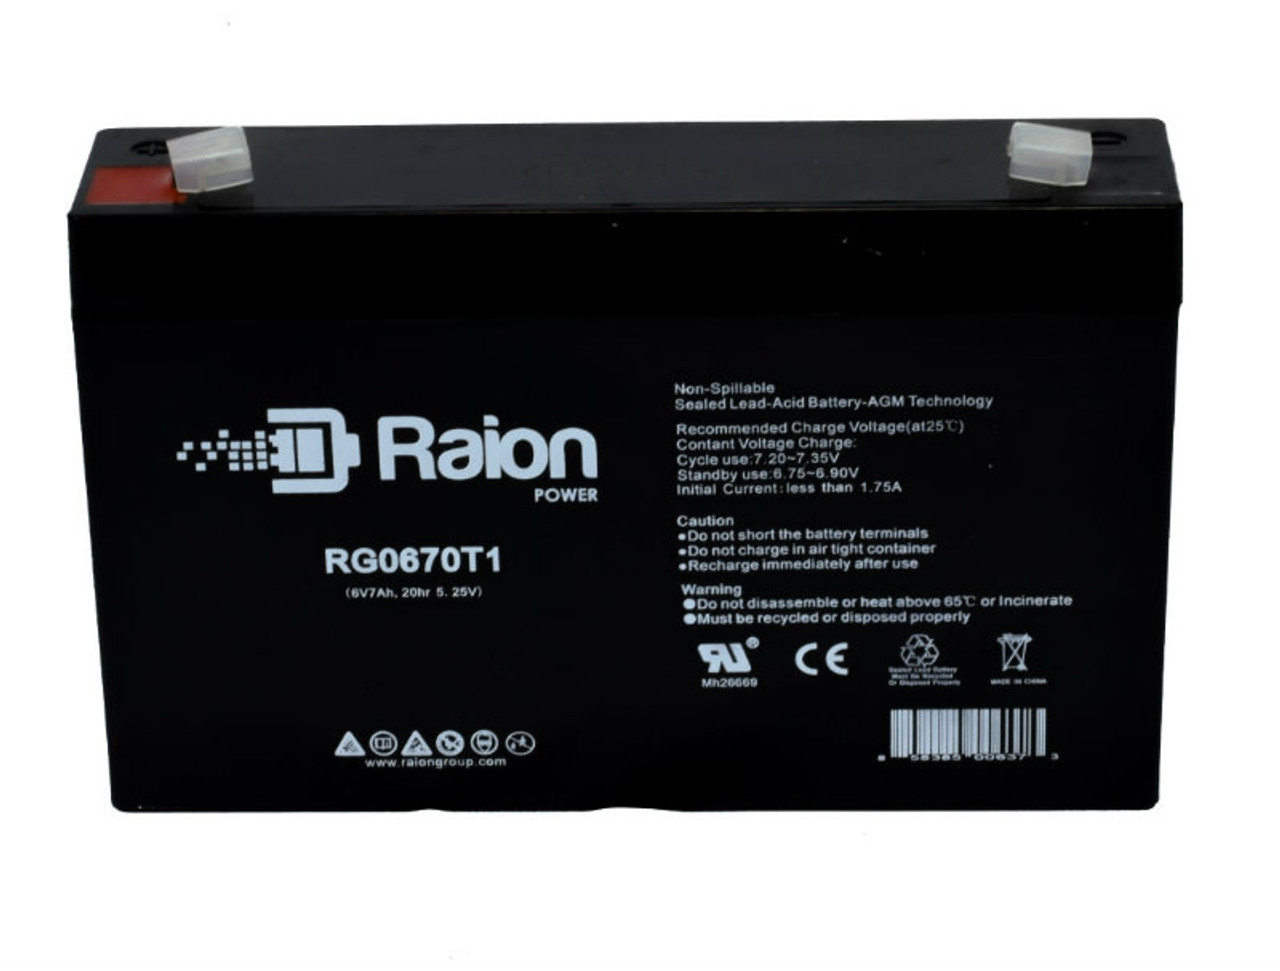 Raion Power RG0670T1 Replacement Battery Cartridge for Cardiac Pacemakers ECD-APU Defibrillator